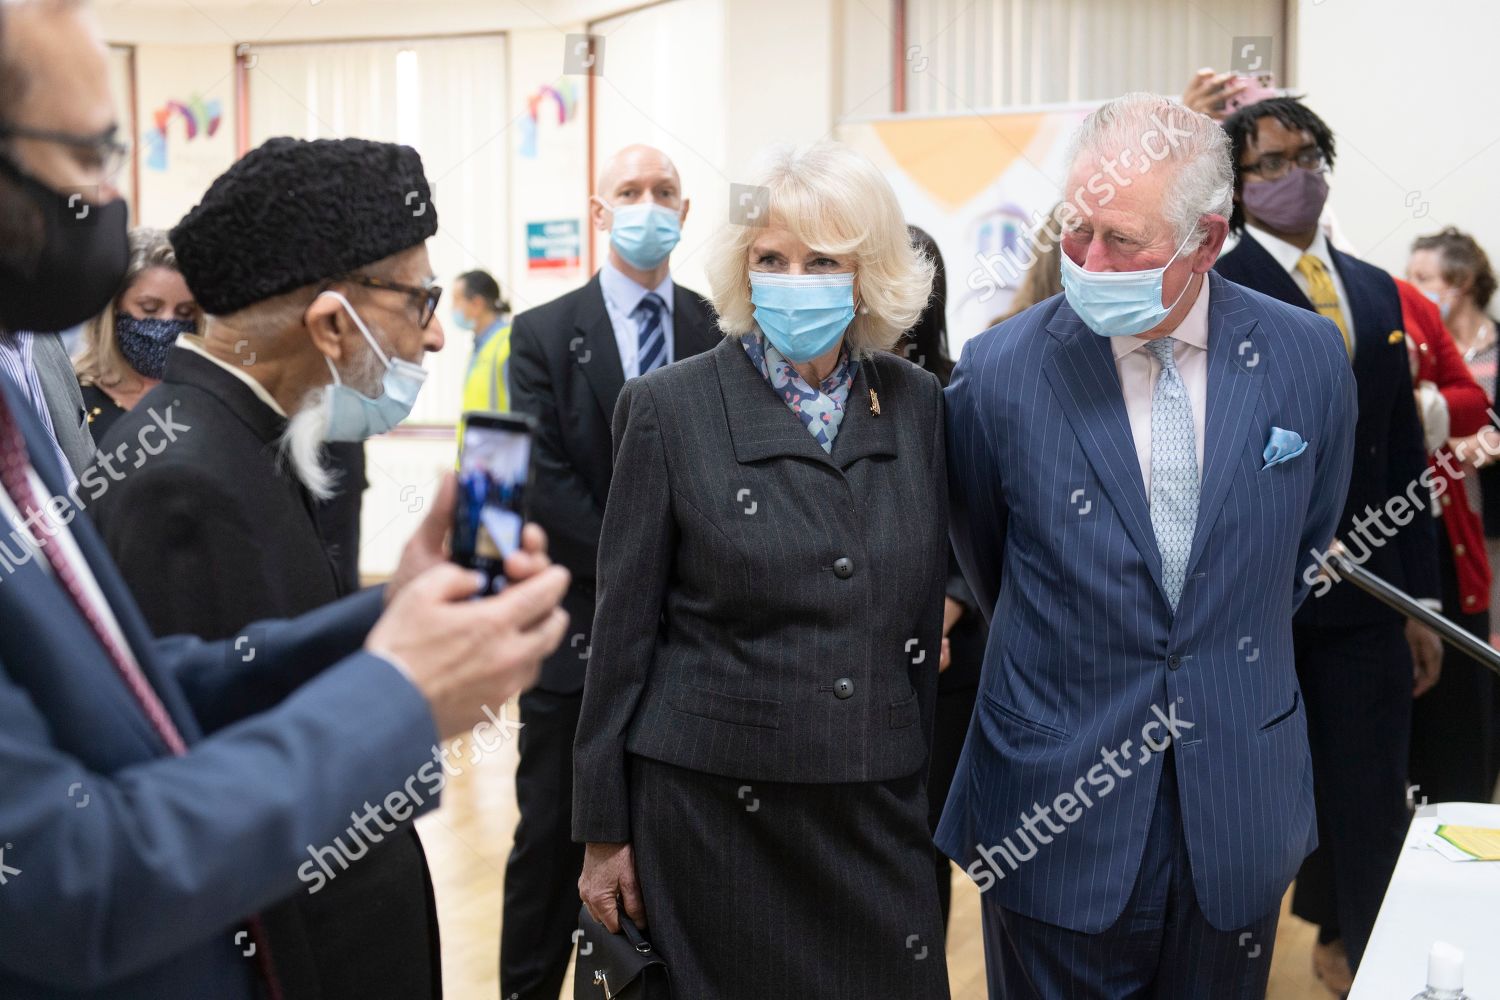 prince-charles-and-camilla-duchess-of-cornwall-visit-vaccination-pop-up-centre-at-finsbury-park-mosque-london-uk-shutterstock-editorial-11802378ai.jpg